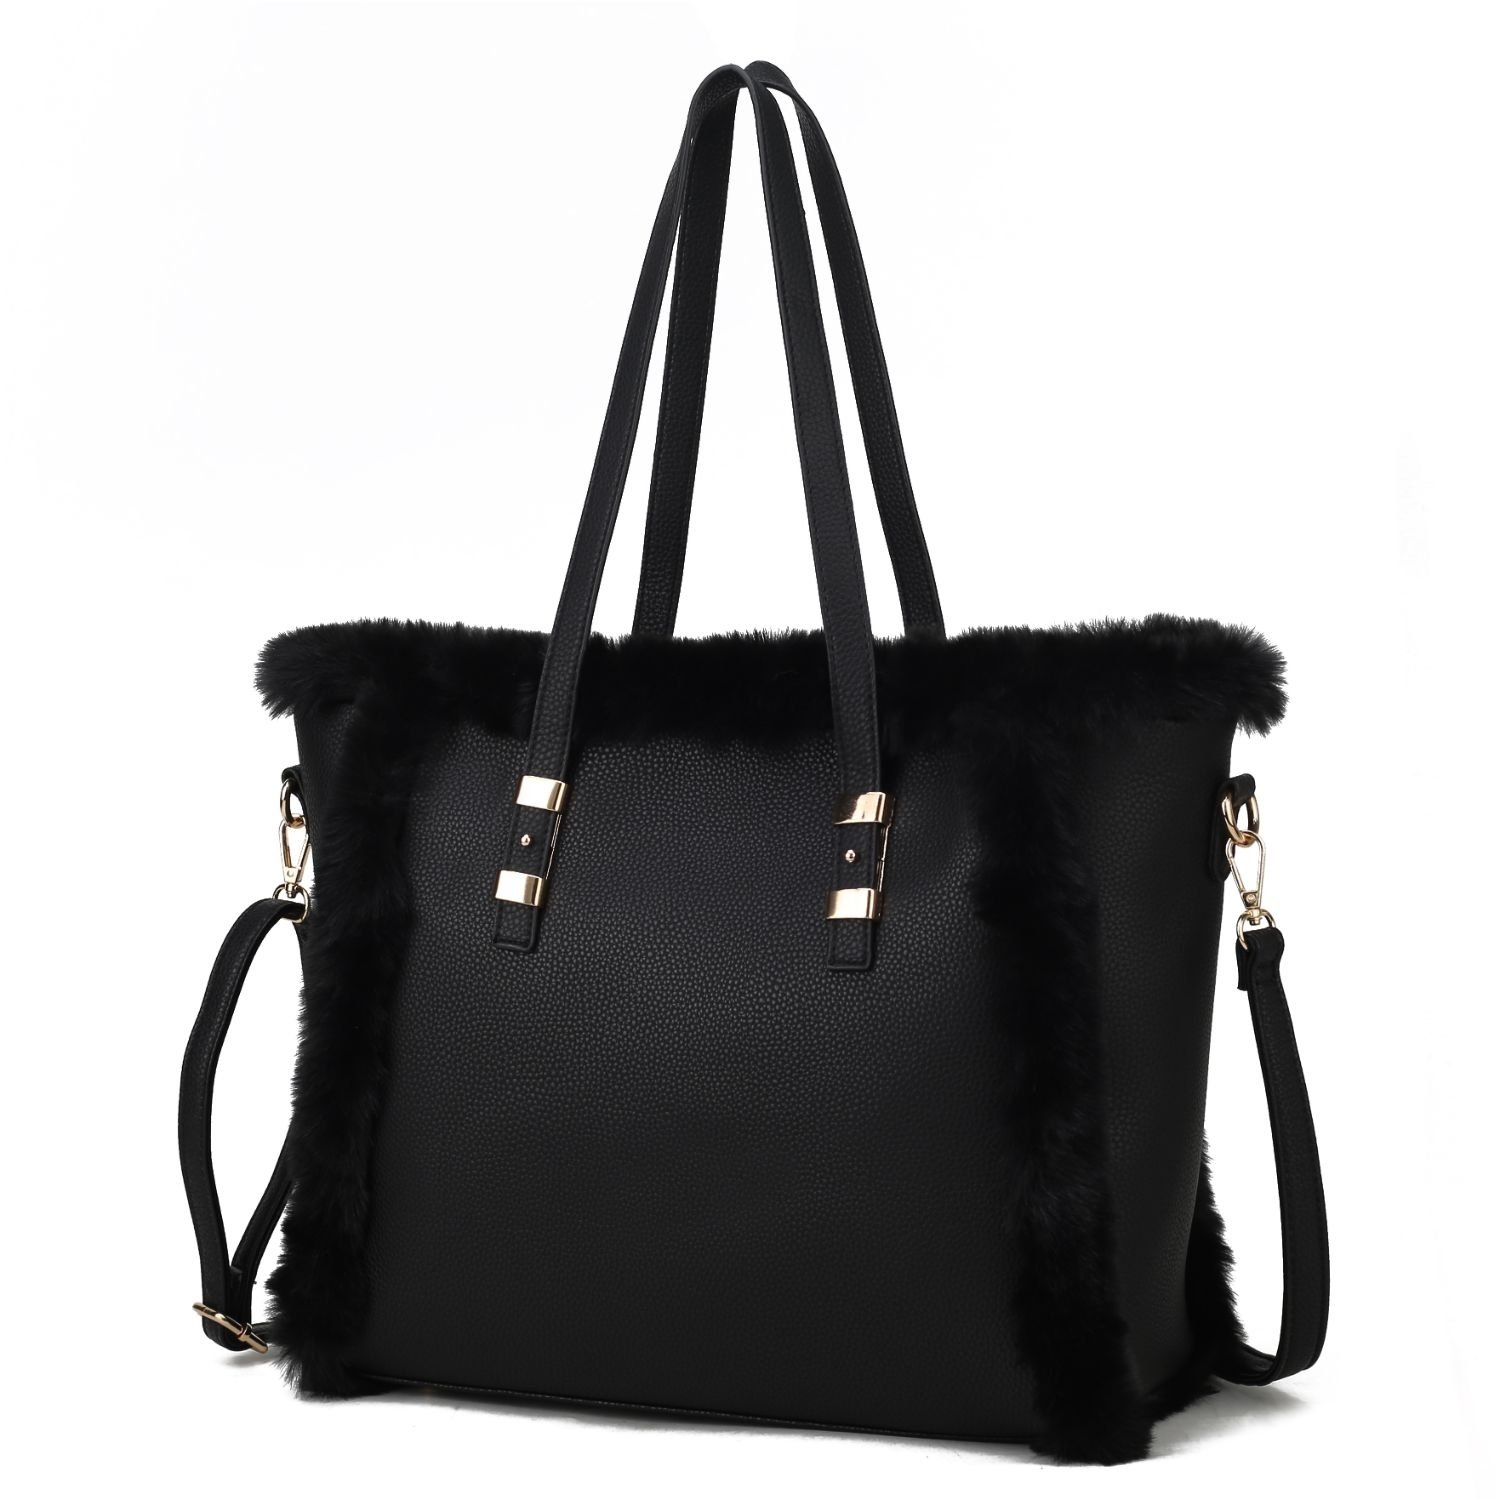 MKF Collection Liza Vegan Leather With Faux Fur Womens Tote Bag By Mia K - Grey